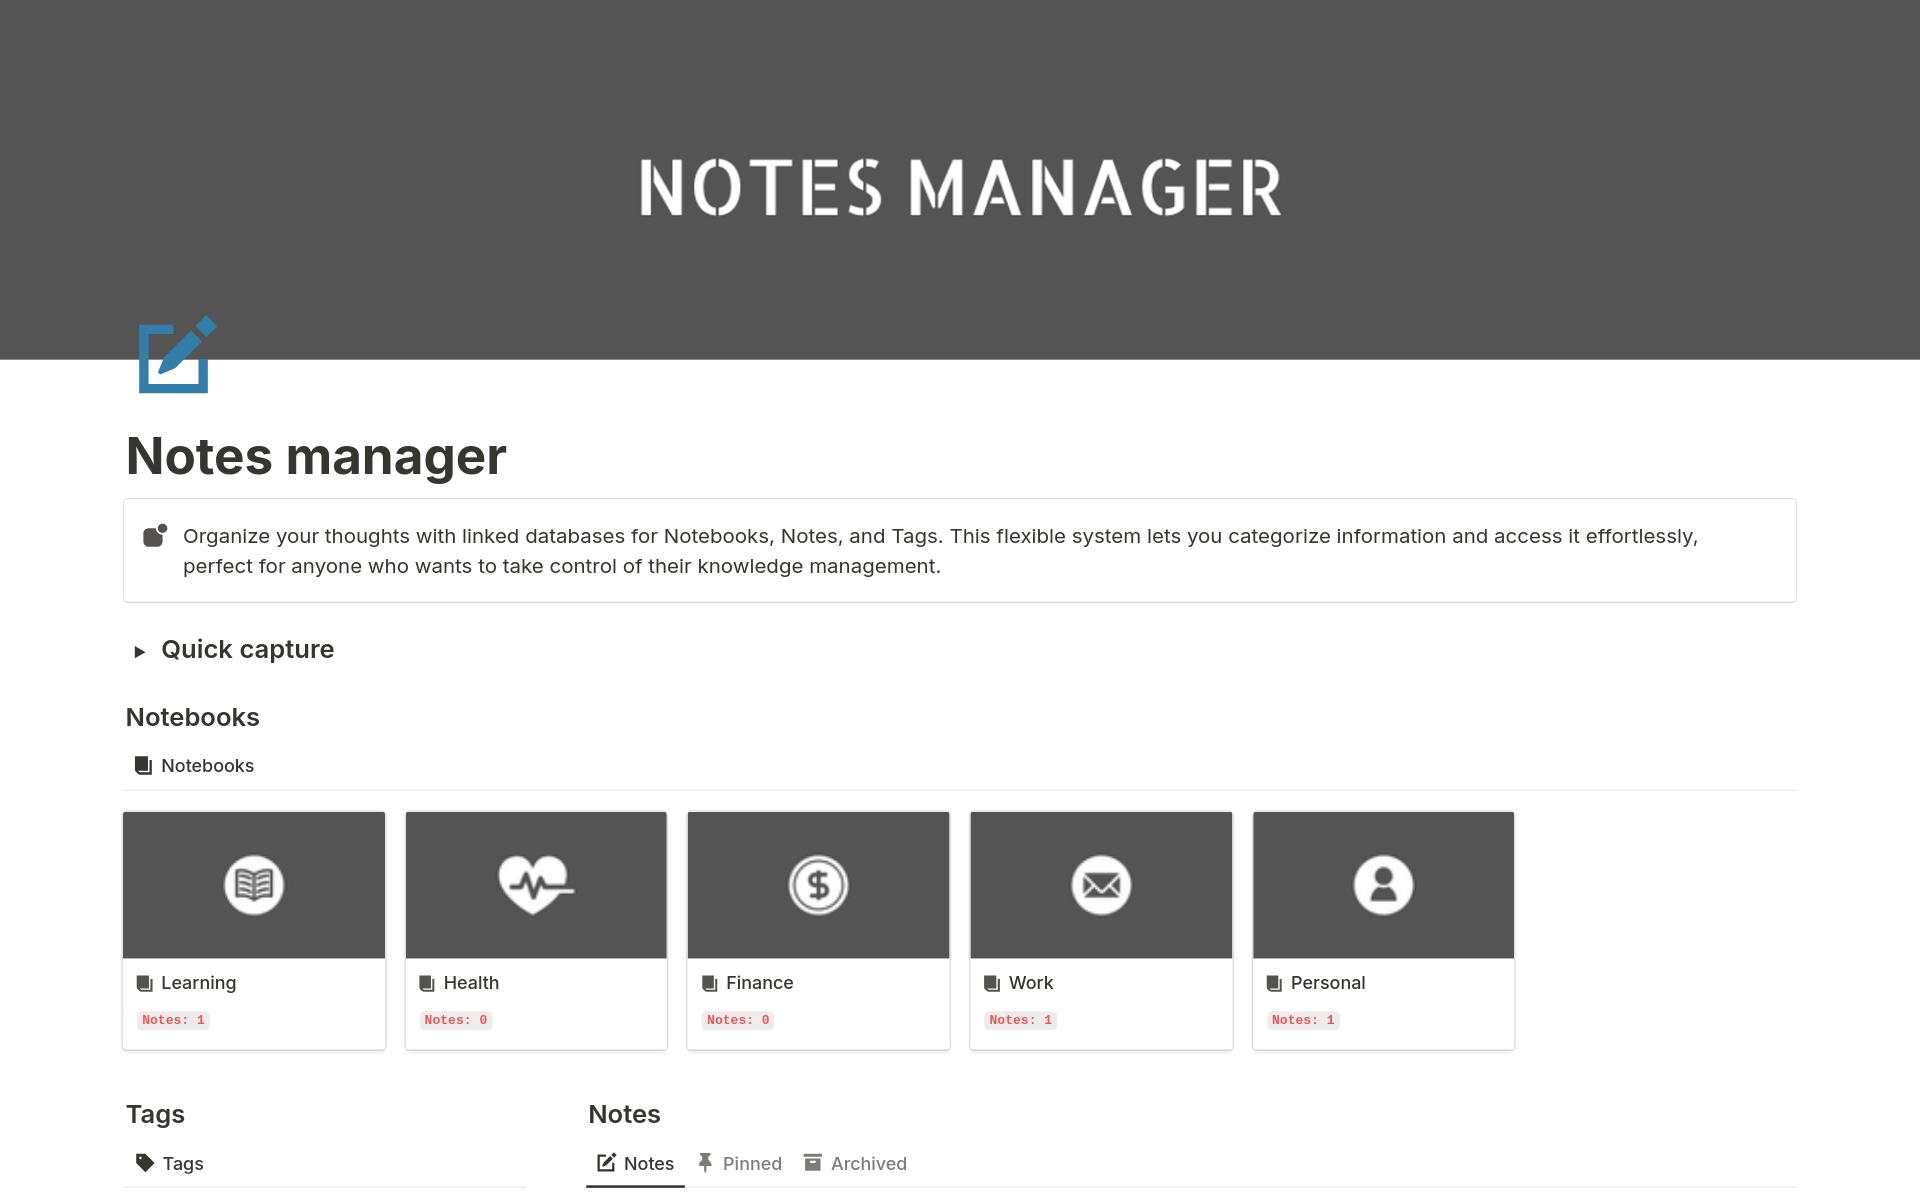 Organize your thoughts with linked databases for Notebooks, Notes, and Tags. This flexible system lets you categorize information and access it effortlessly, perfect for anyone who wants to take control of their knowledge management.